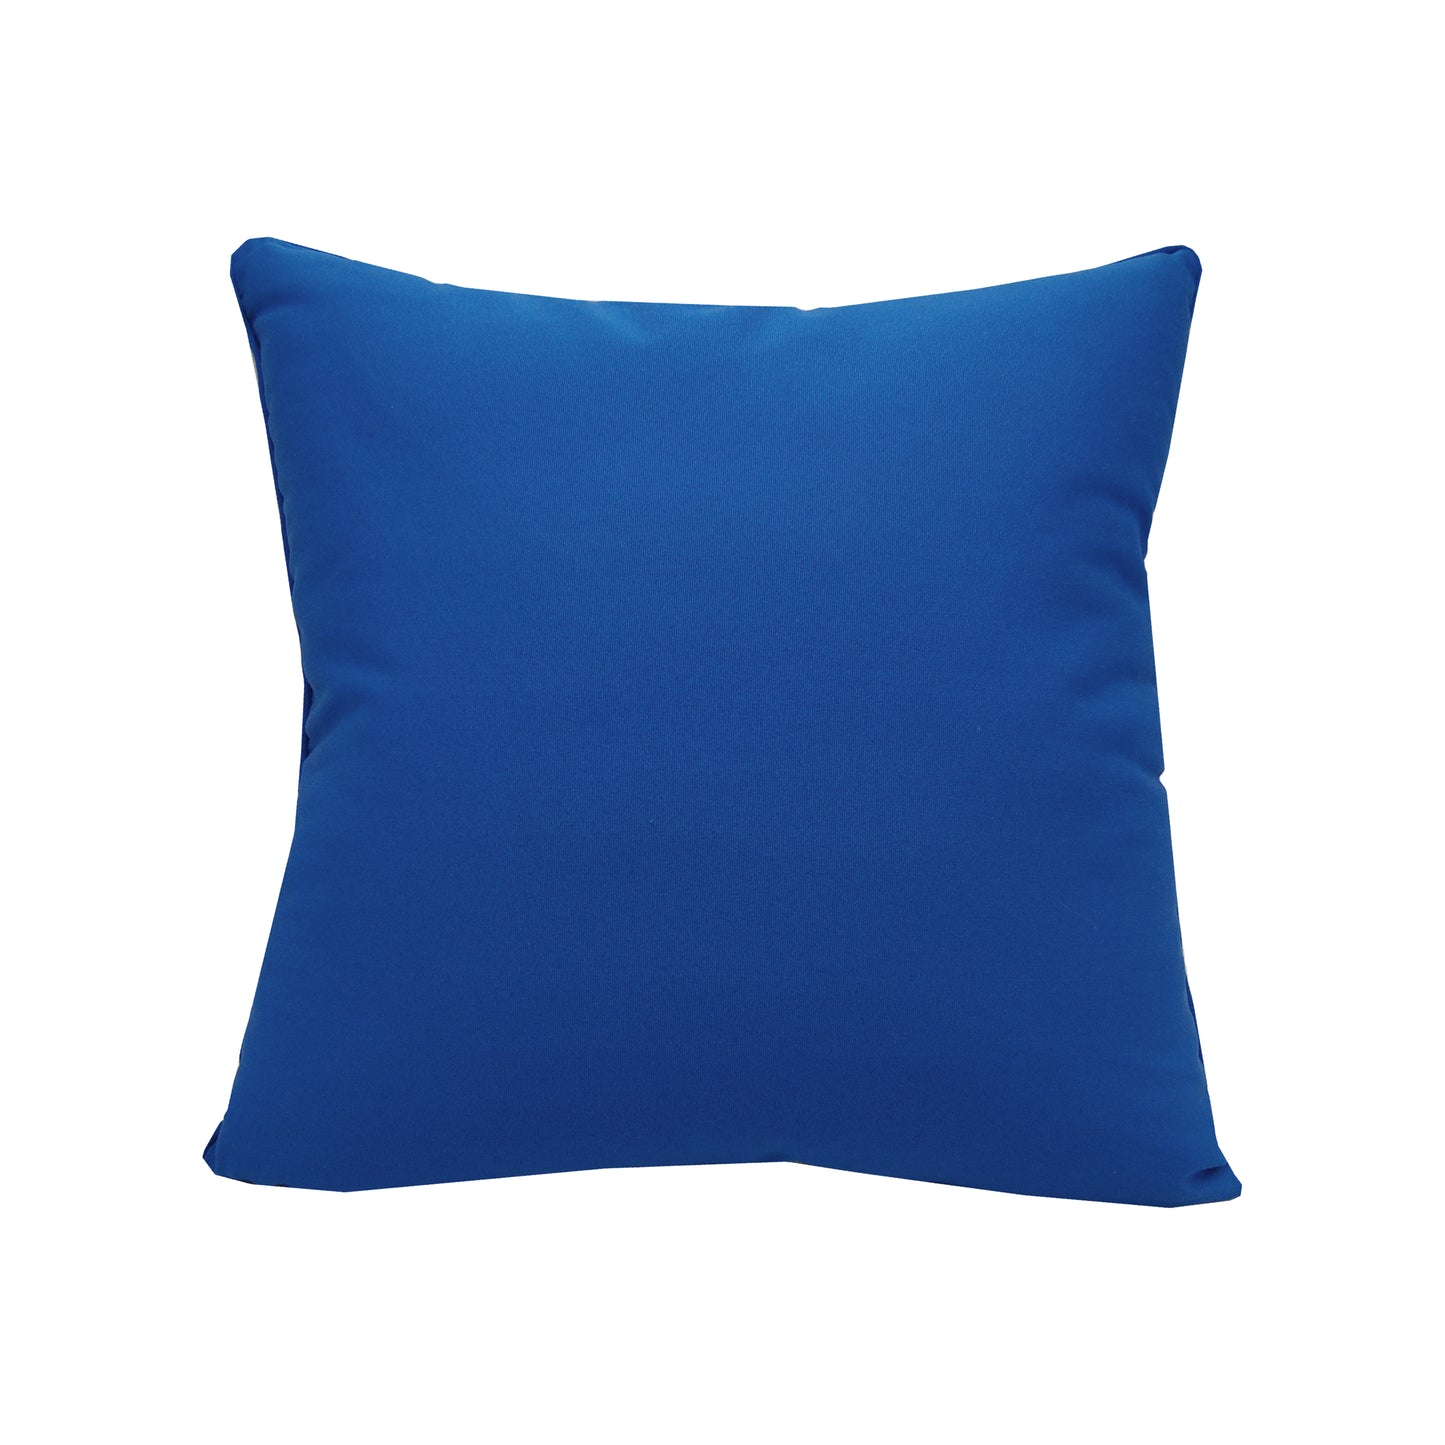 Solid blue fabric; back side of the Azure Fish School outdoor pillow.